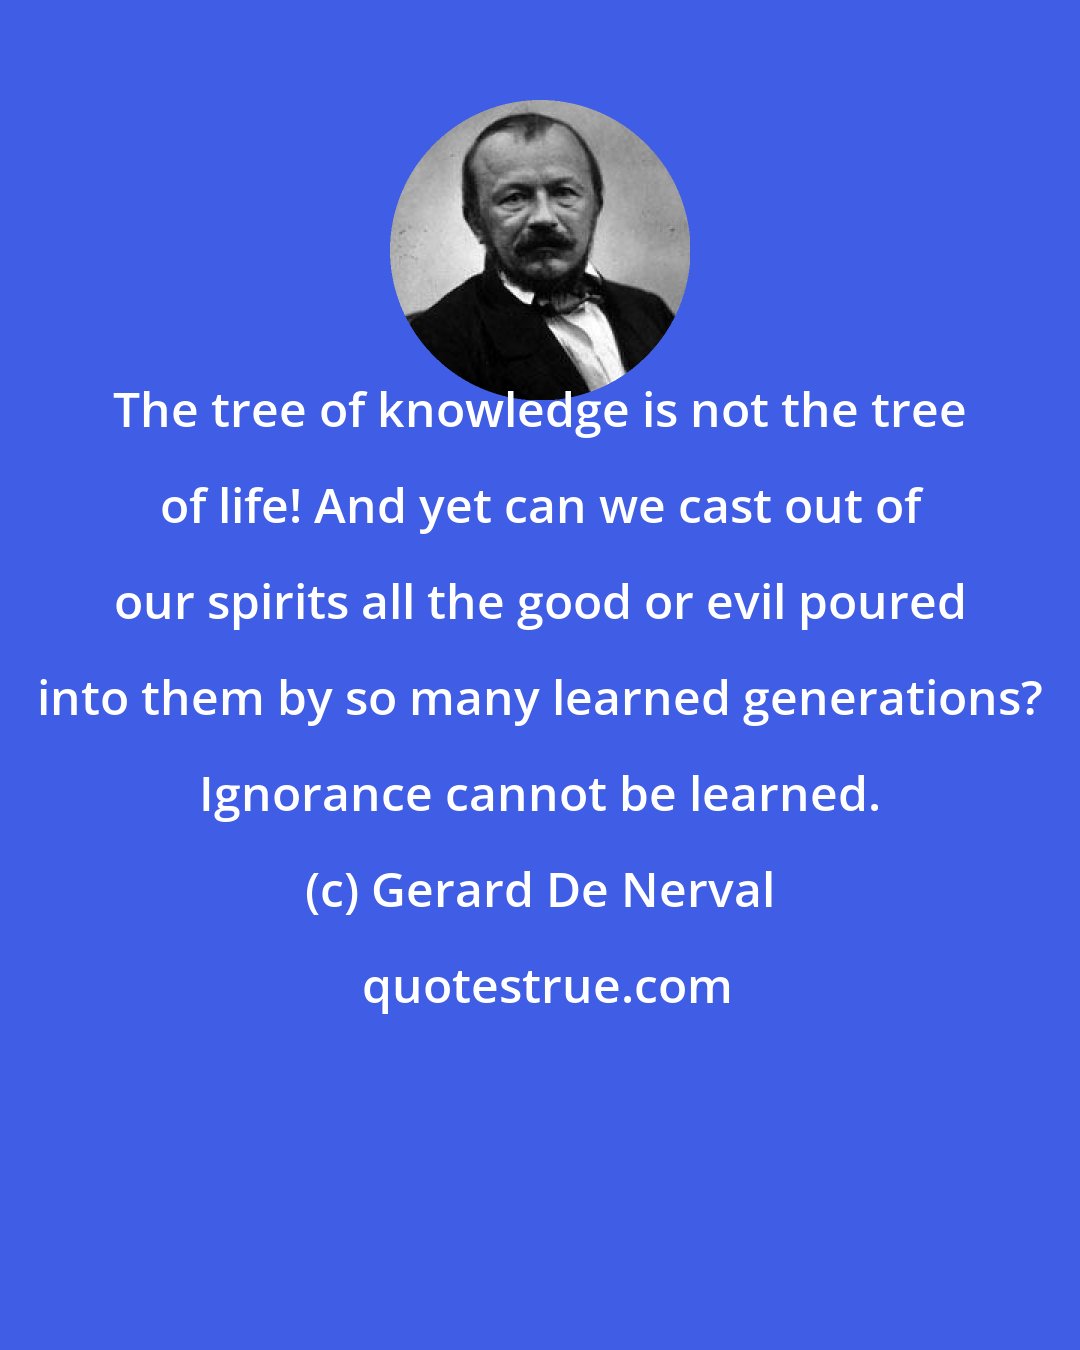 Gerard De Nerval: The tree of knowledge is not the tree of life! And yet can we cast out of our spirits all the good or evil poured into them by so many learned generations? Ignorance cannot be learned.